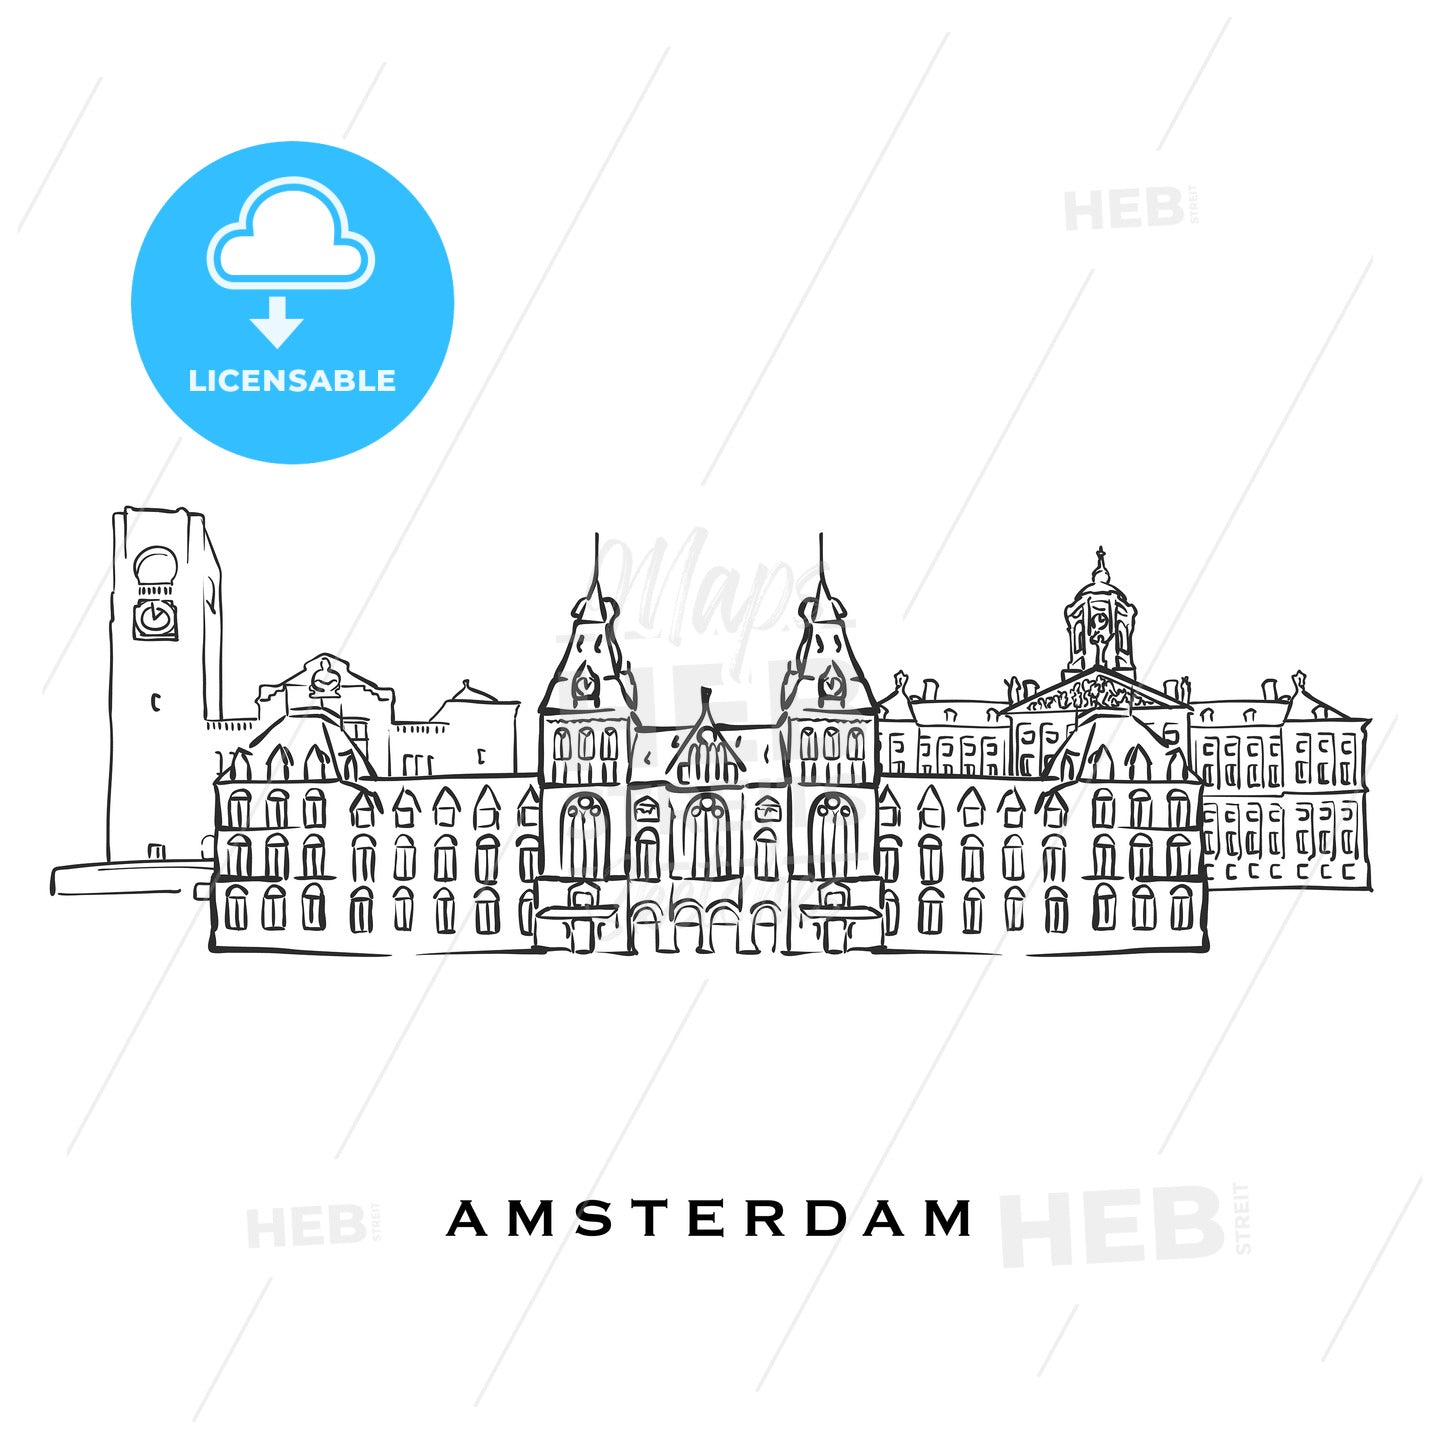 Amsterdam Netherlands famous architecture – instant download